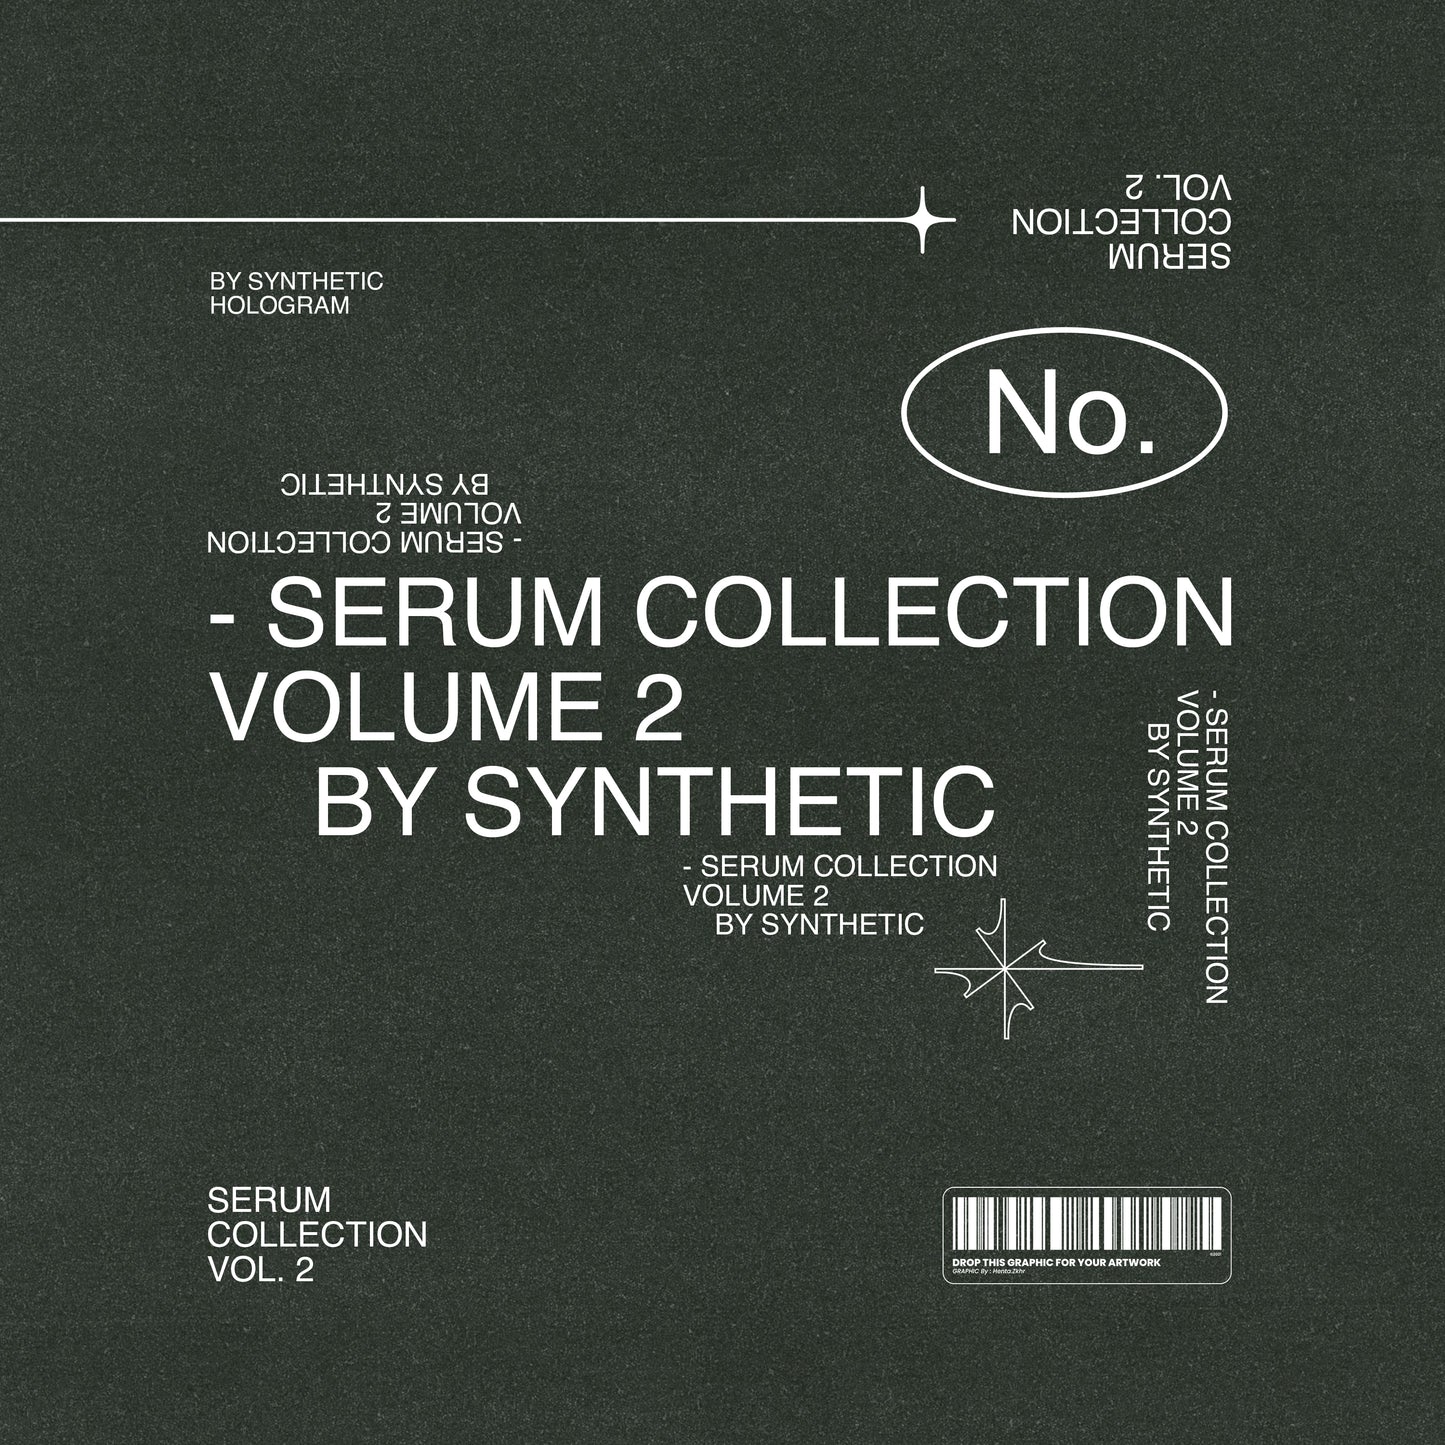 SYNTHETIC'S SERUM COLLECTION VOL. 2